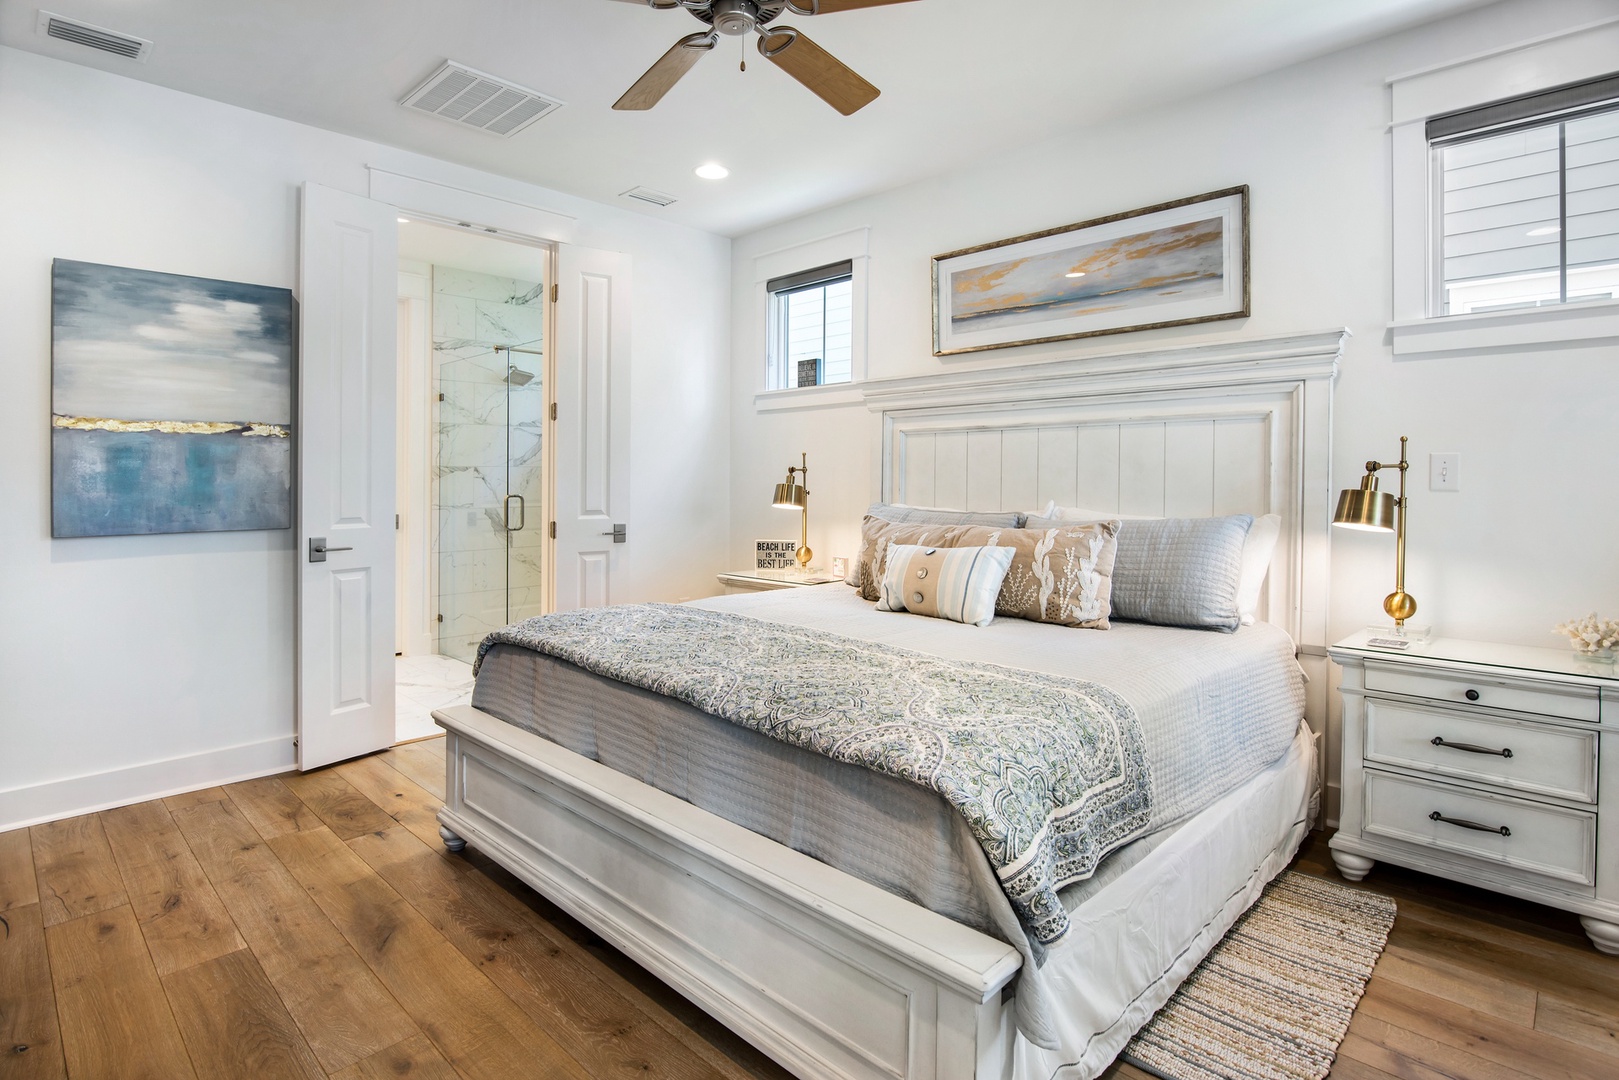 The ground floor master bedroom features a king size bed and pool views!